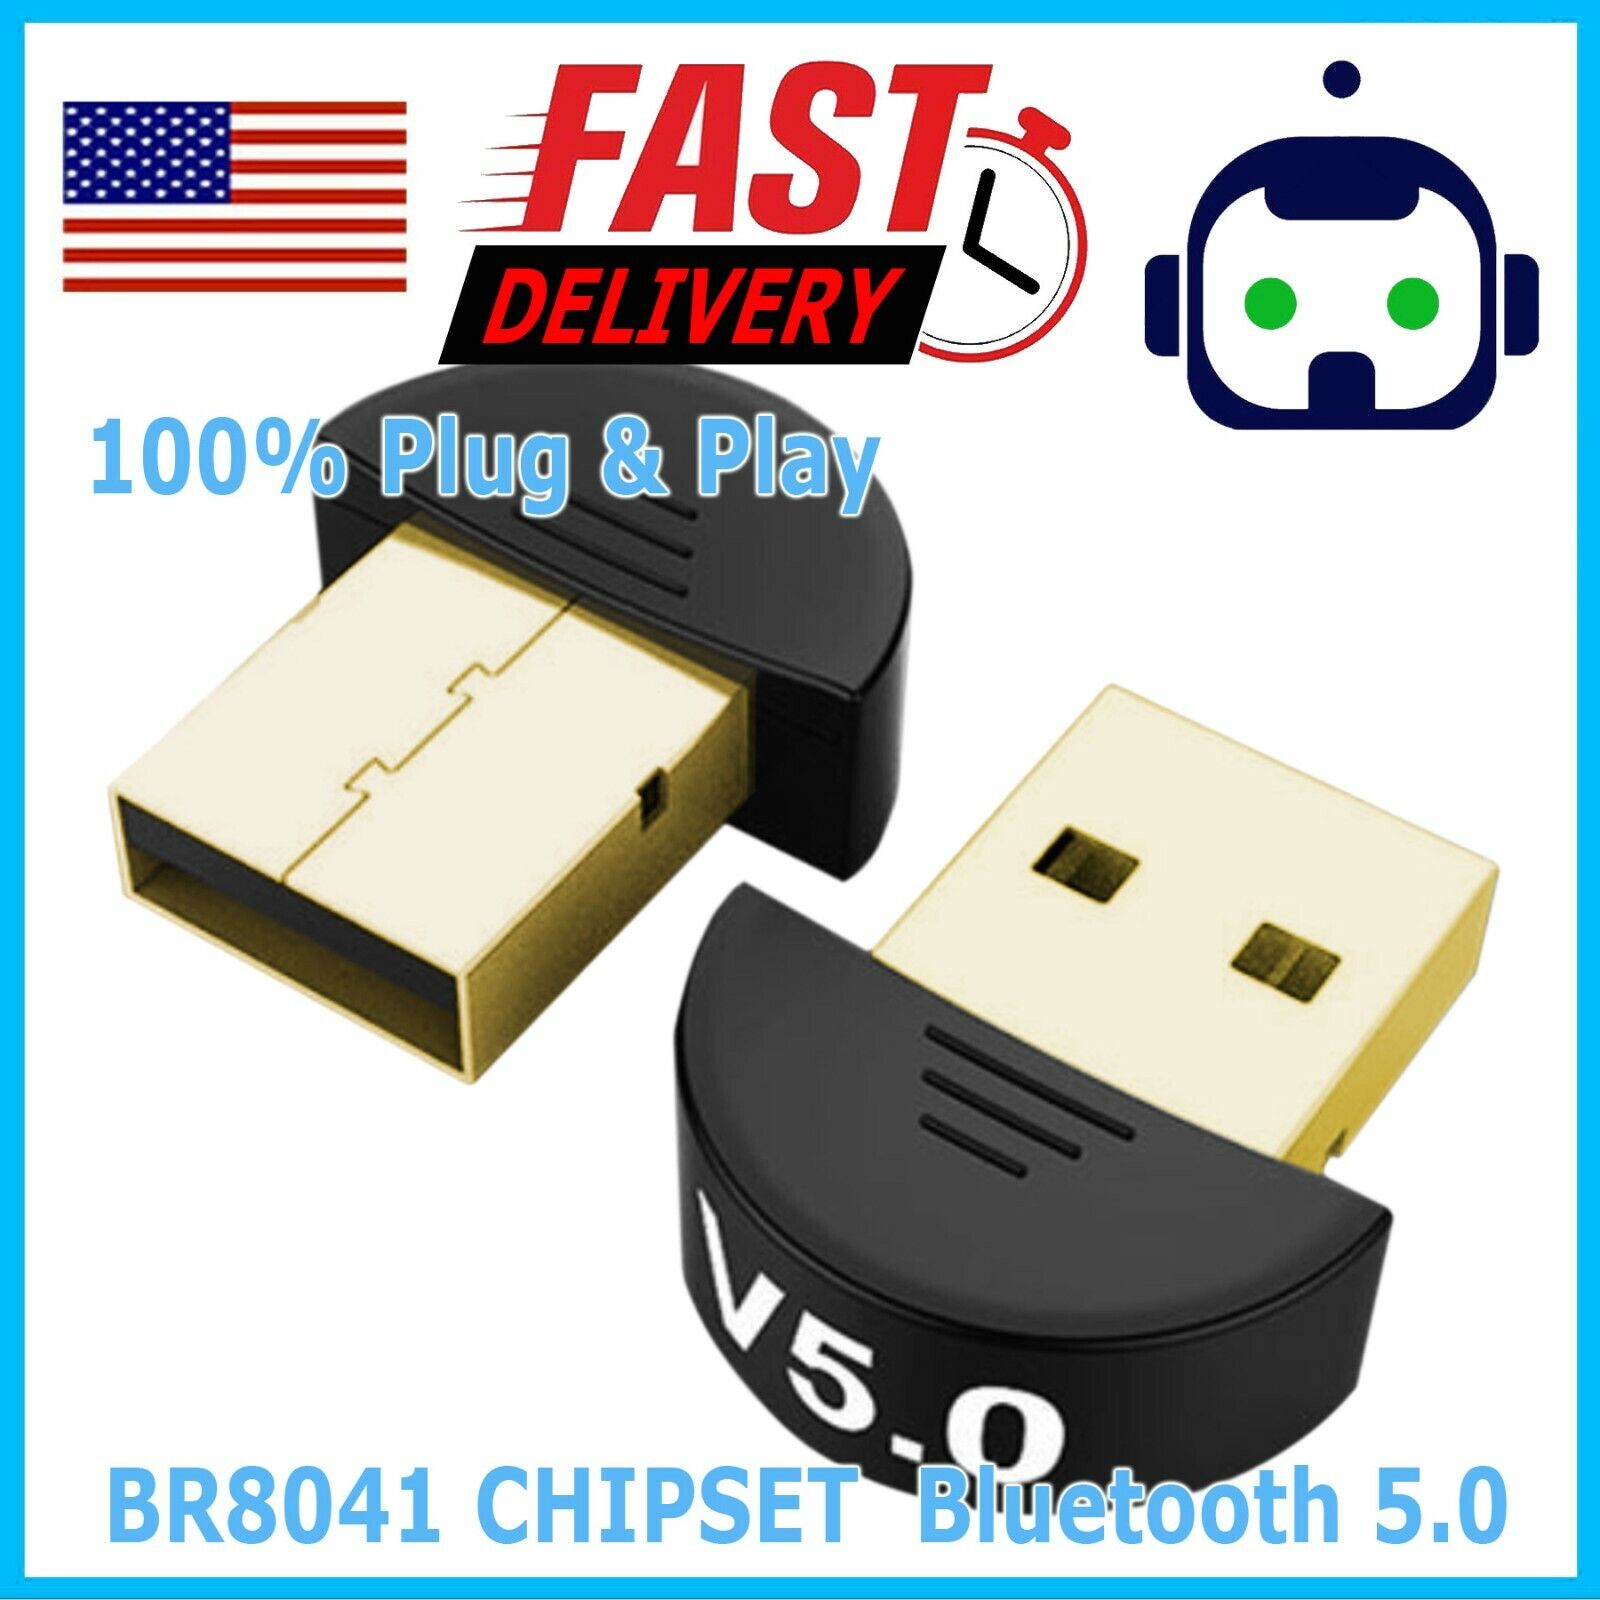 USB Bluetooth 5.0 Wireless Audio New arrival Tampa Mall Music Adapter rec Dongle Stereo